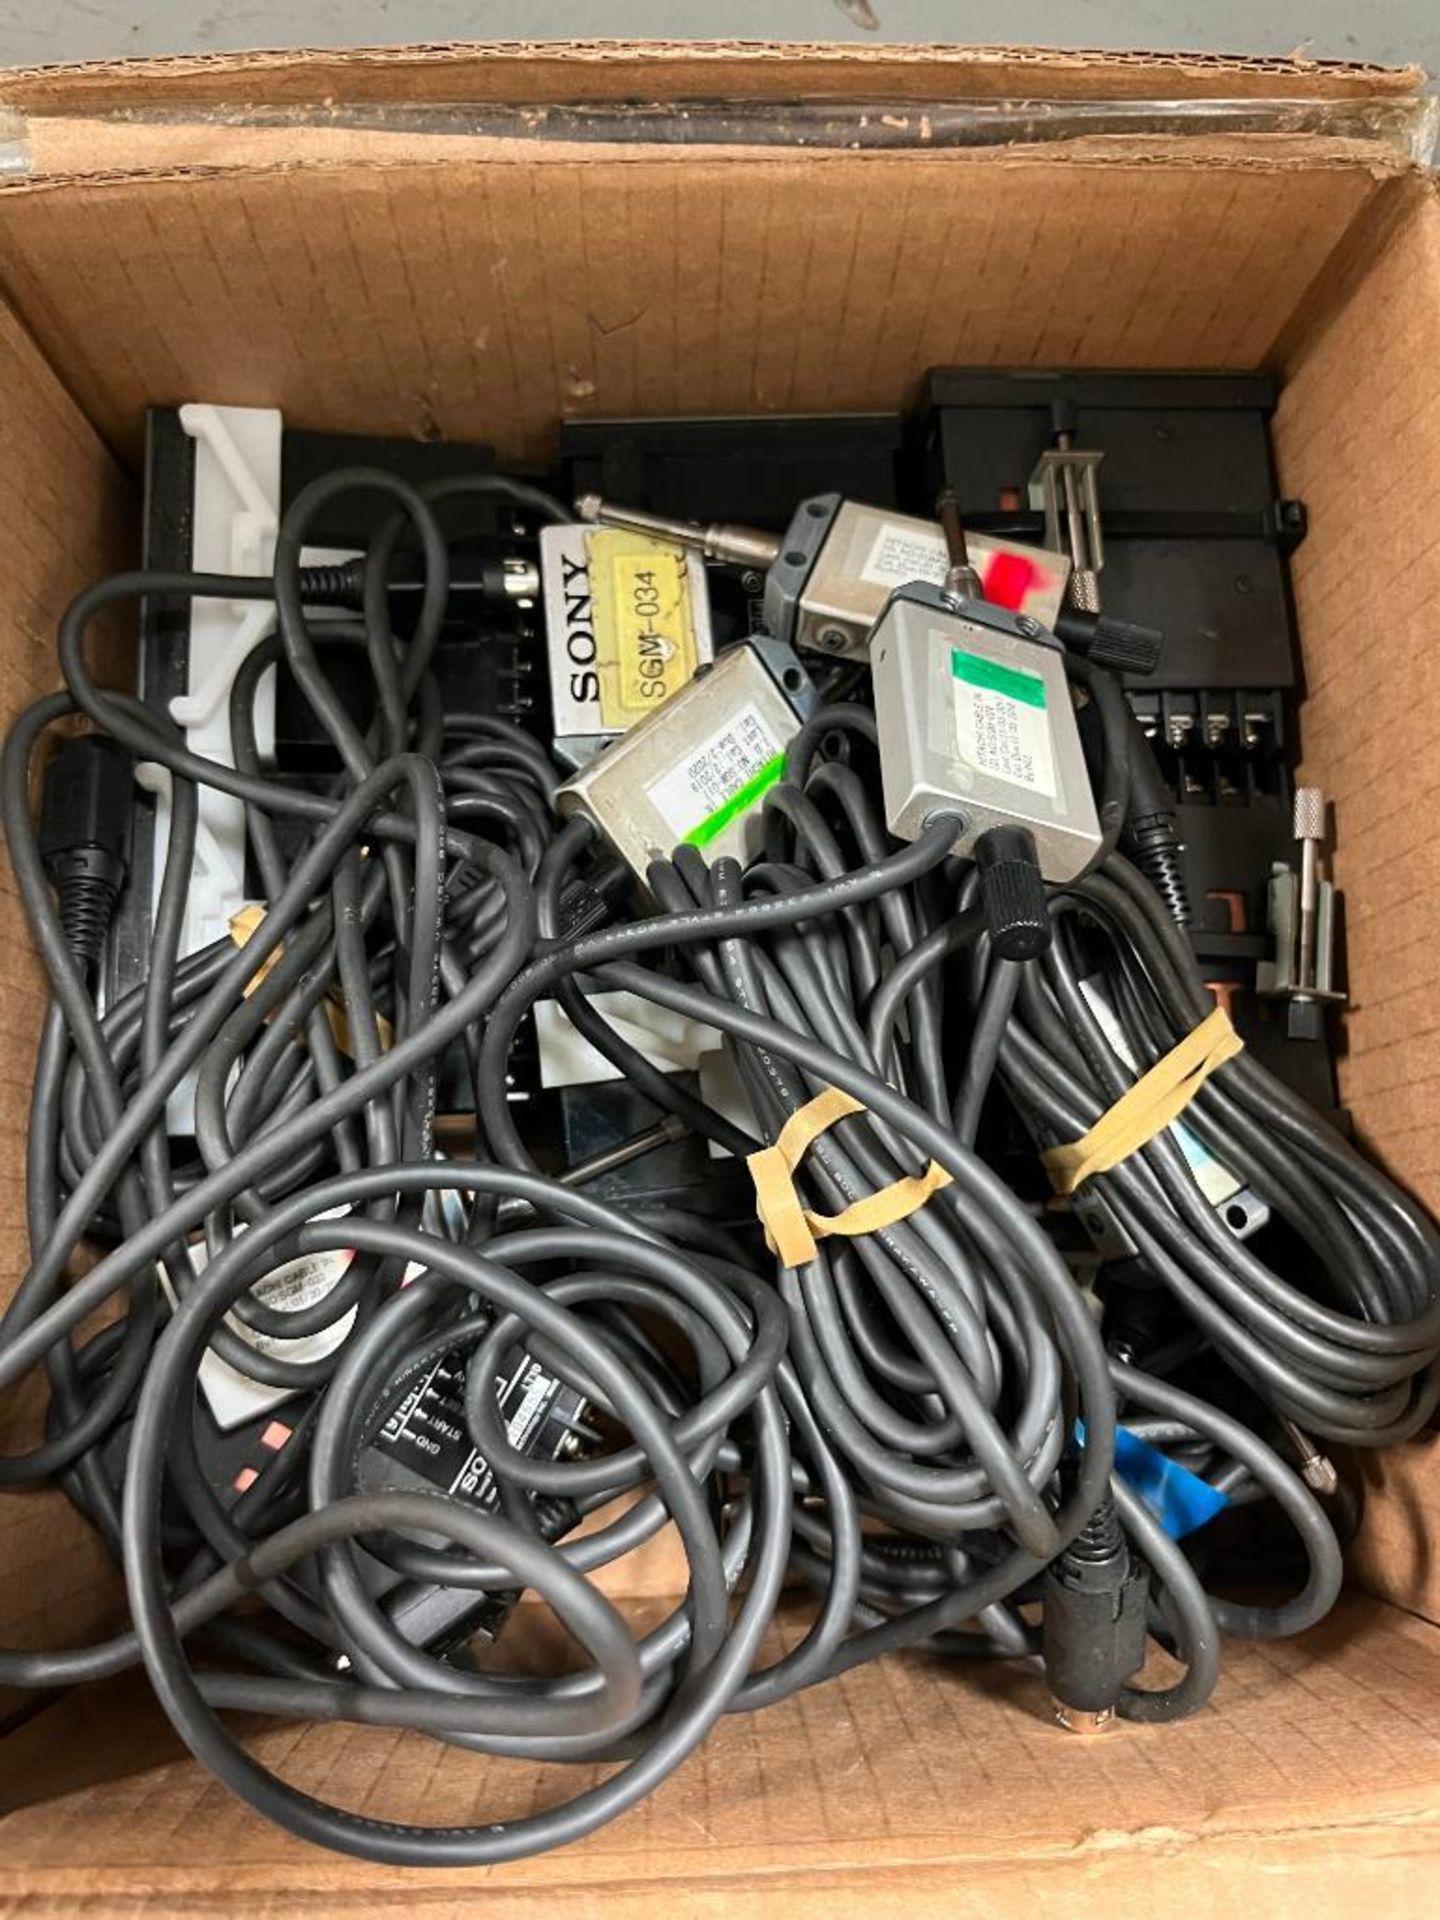 Box of Sony DT12N Digital Gauging Probes w/ Cables & Display Unit